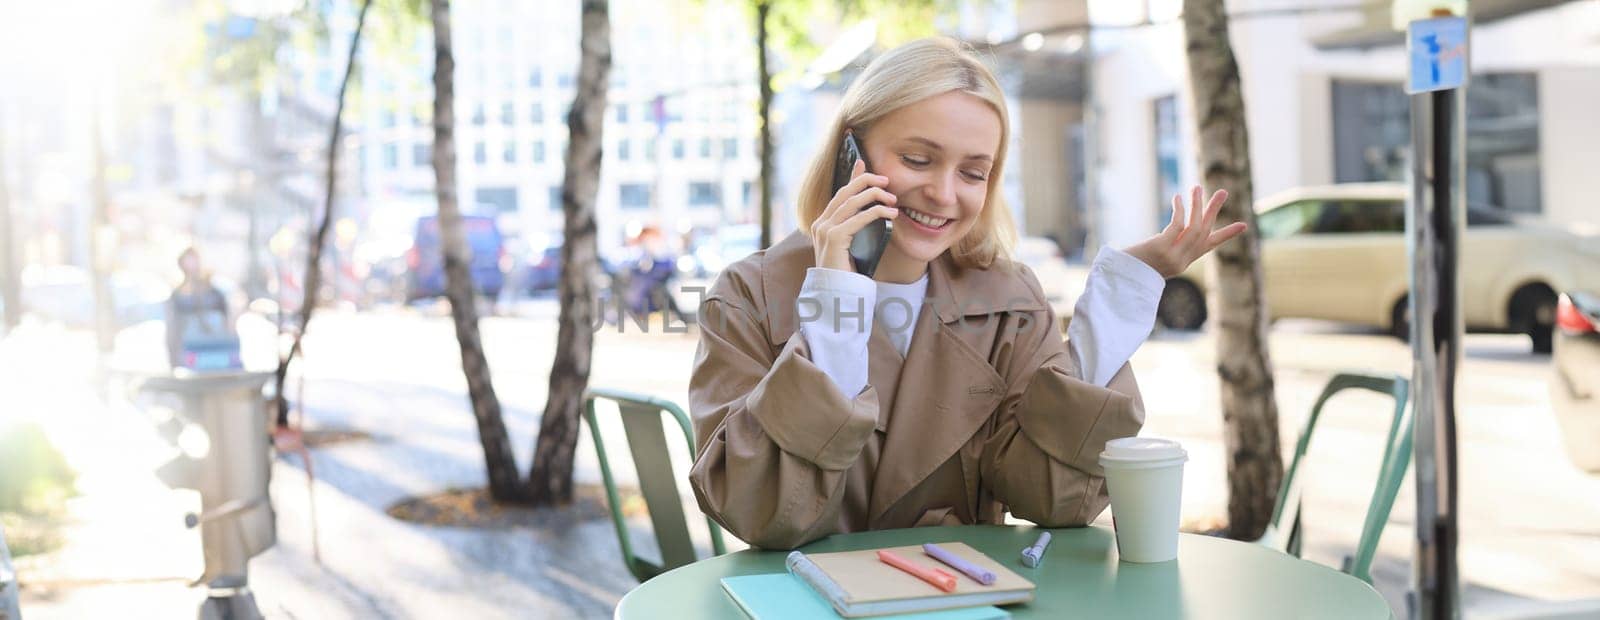 Outgoing young happy woman, sitting in cafe outdoors, talking on mobile phone, smiling, spending time outside in city centre, chatting. Lifestyle and people concept